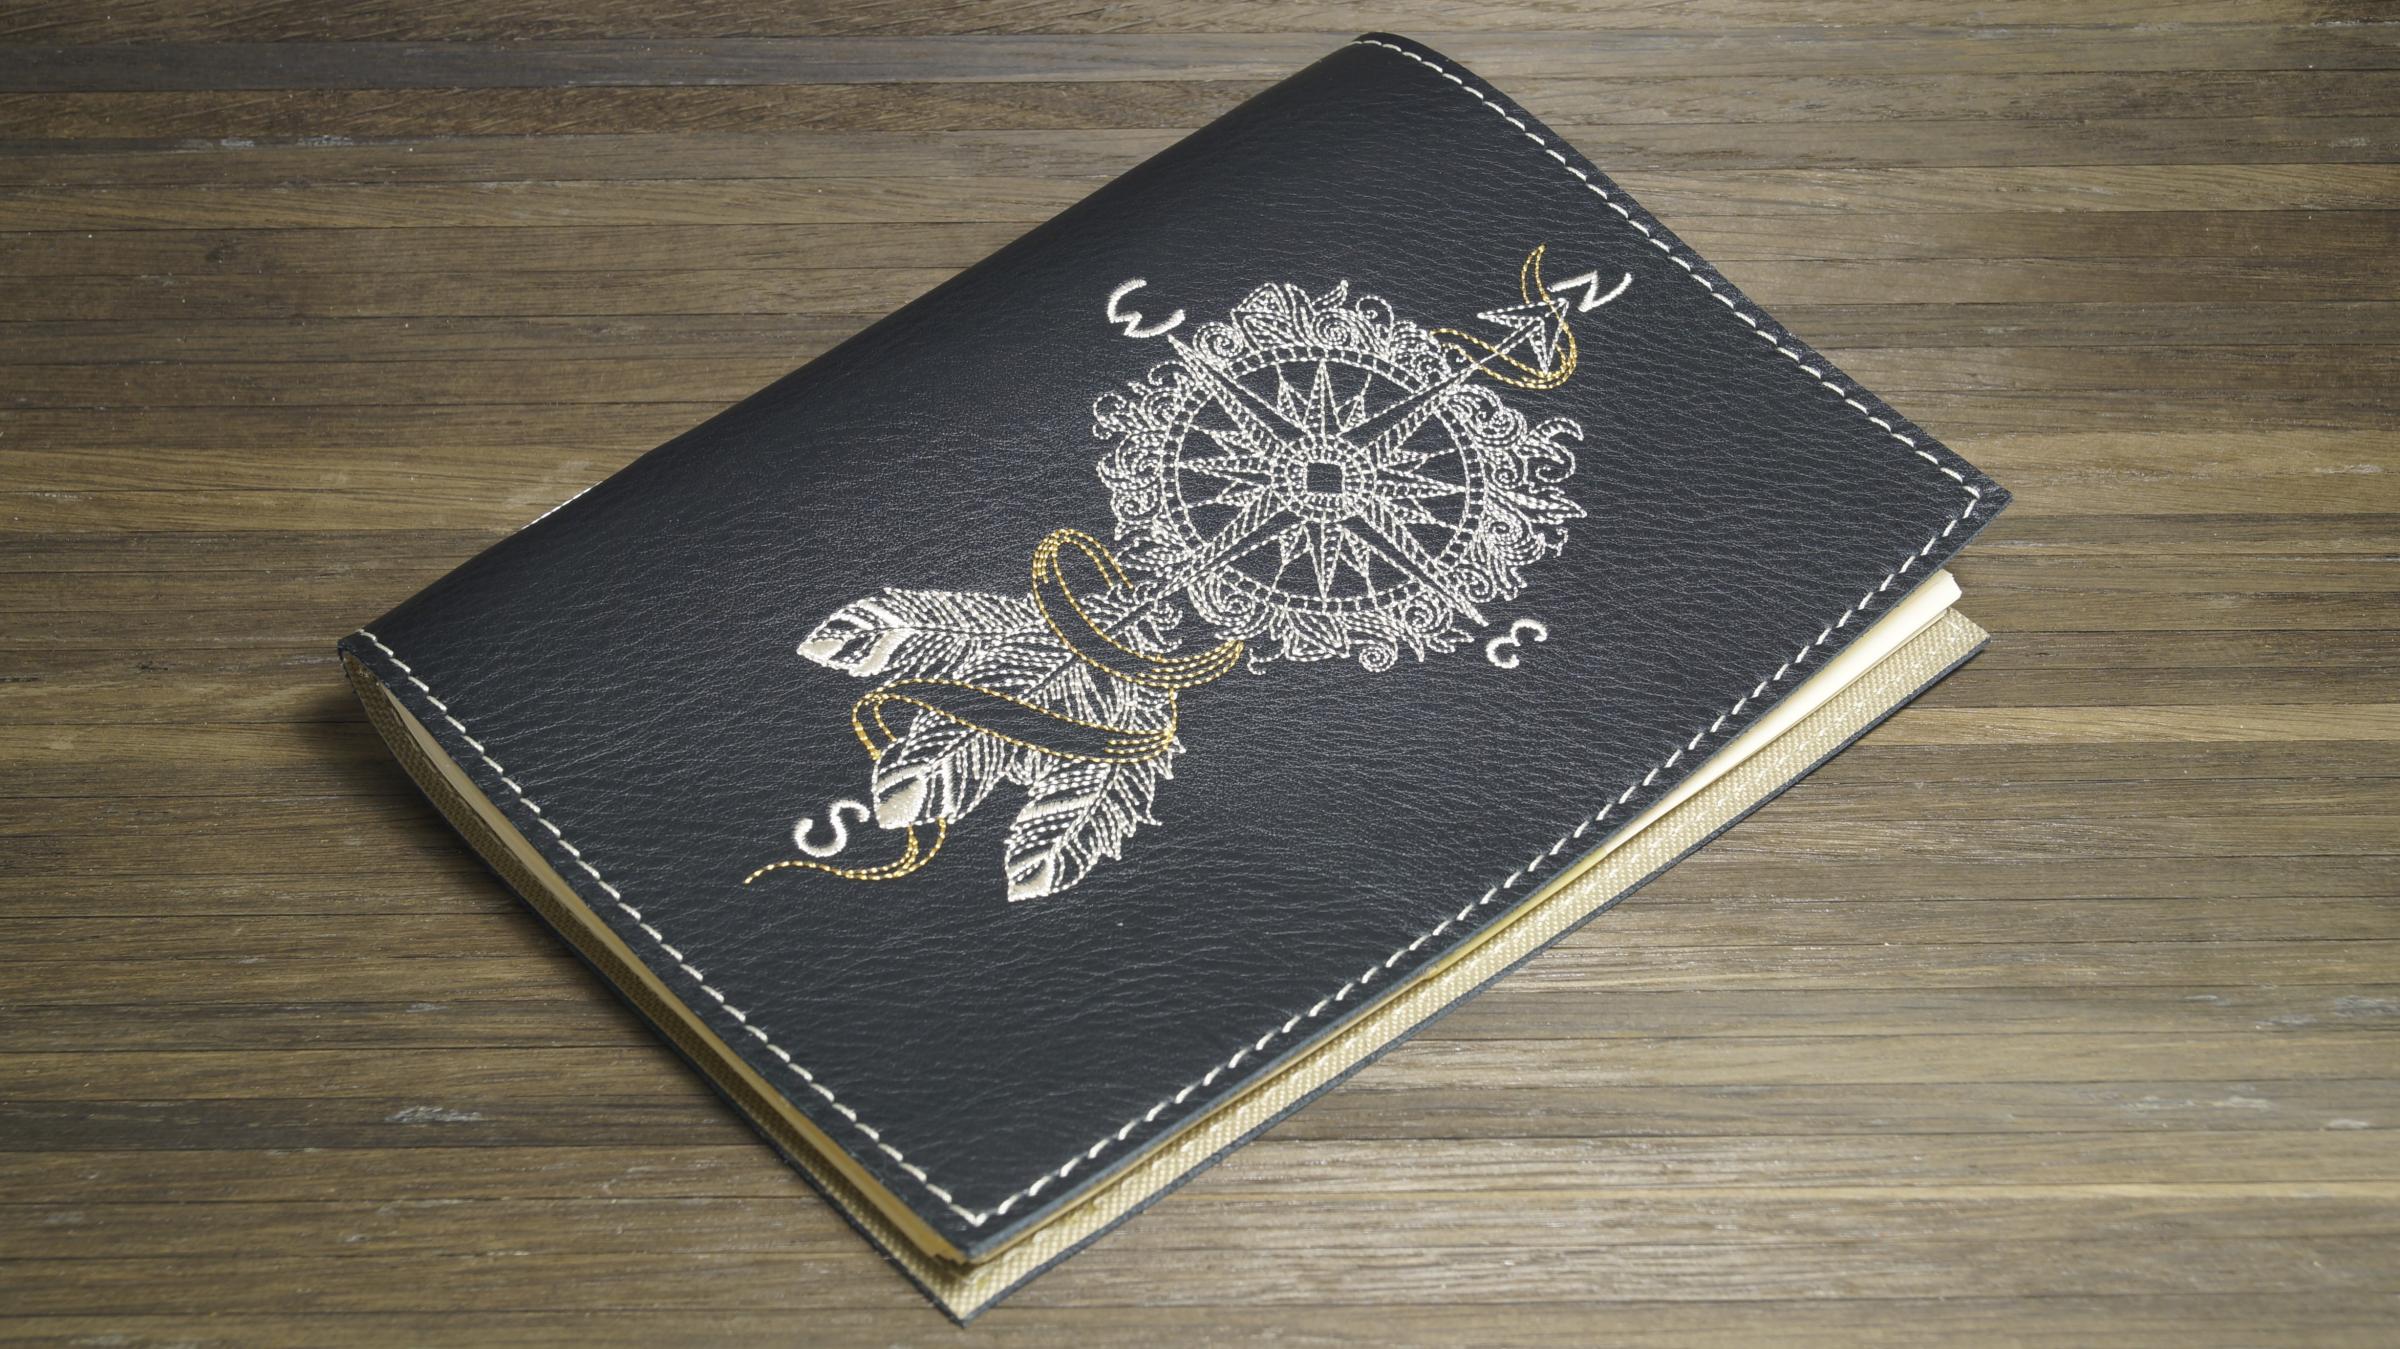 Embroidered cover with Compass embroidery design